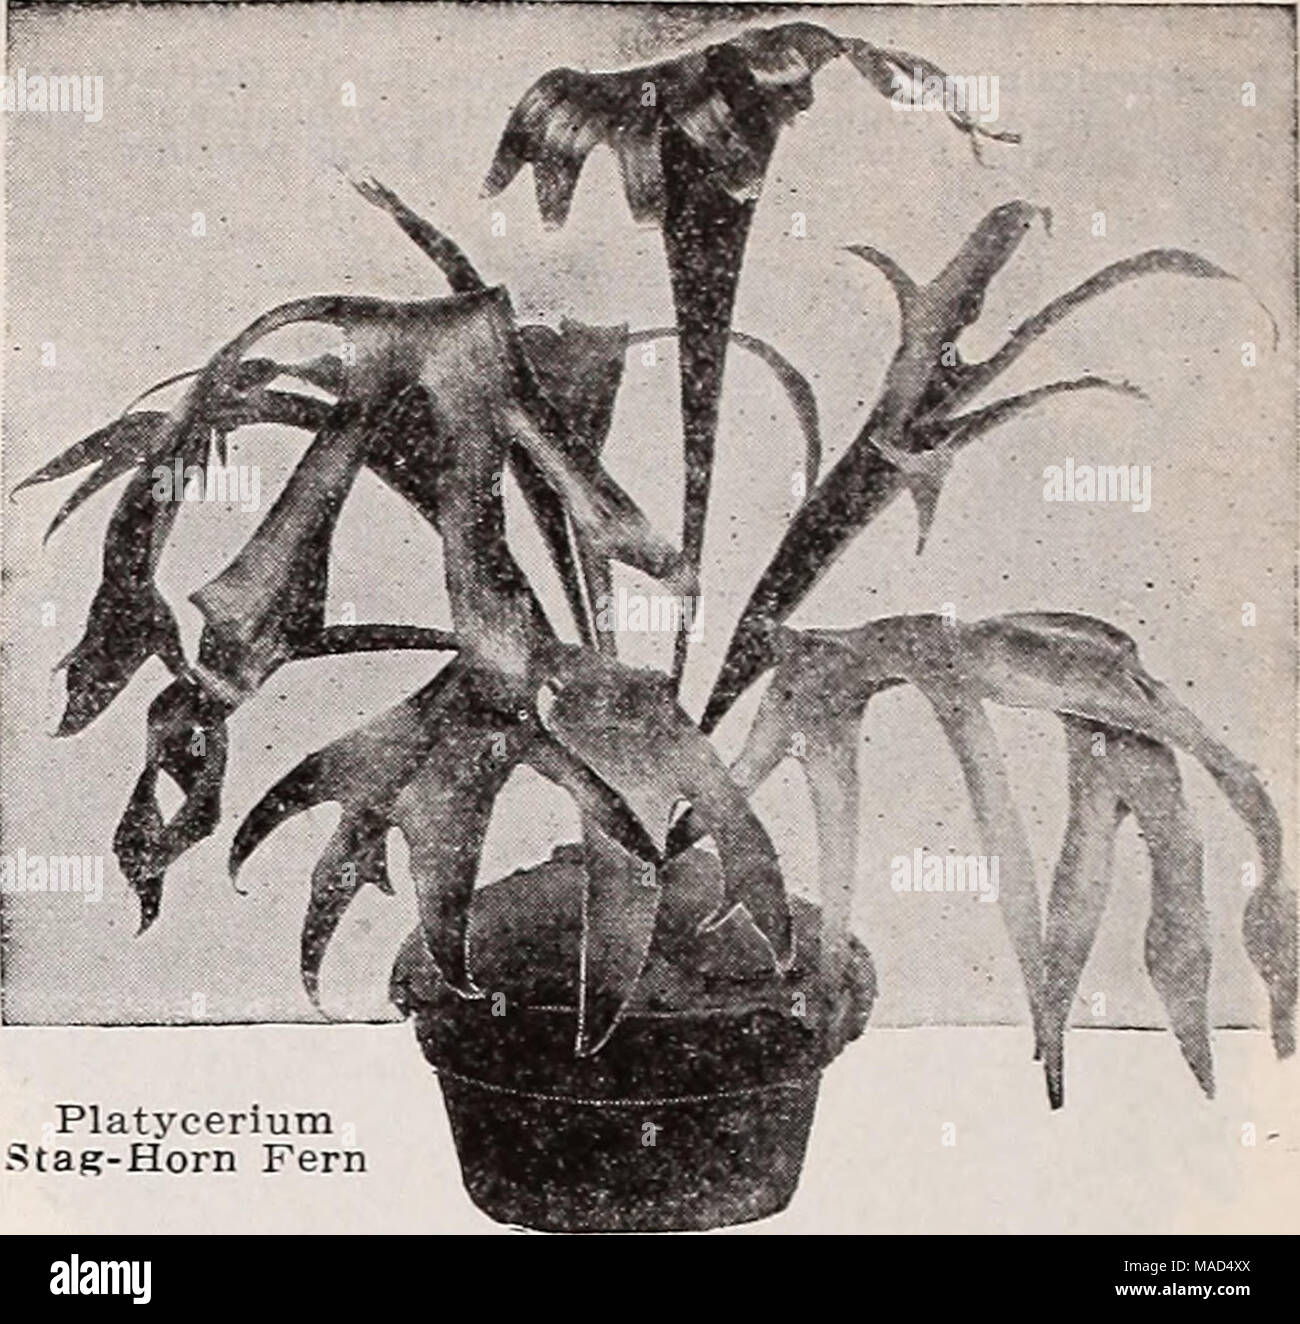 . Dreer's wholesale catalog for florists : winter - spring - summer 1938 . Platycerium .^tag-Horn Fern PlatyceriumâStag-Horn Fern The Stag-Horn Ferns are now being recognized as desirable plants for store and home decoration. Alcicome. A showy variety with long, narrow leaves of a striking grayish-green color. 6-inch pots $2.50 each. Grande. 6-inch pot plants $5.00 each. Polystichum coriaceumâThe Baker Fern Excellent for cut fronds and one of the best for bas- kets, etc. lV2-inch pots, ready July, $8.00 per 100; $75.00 per 1000. 3-inch pots ready now $3.00 per doz.; $20.00 per 100. Four-Inch P Stock Photo